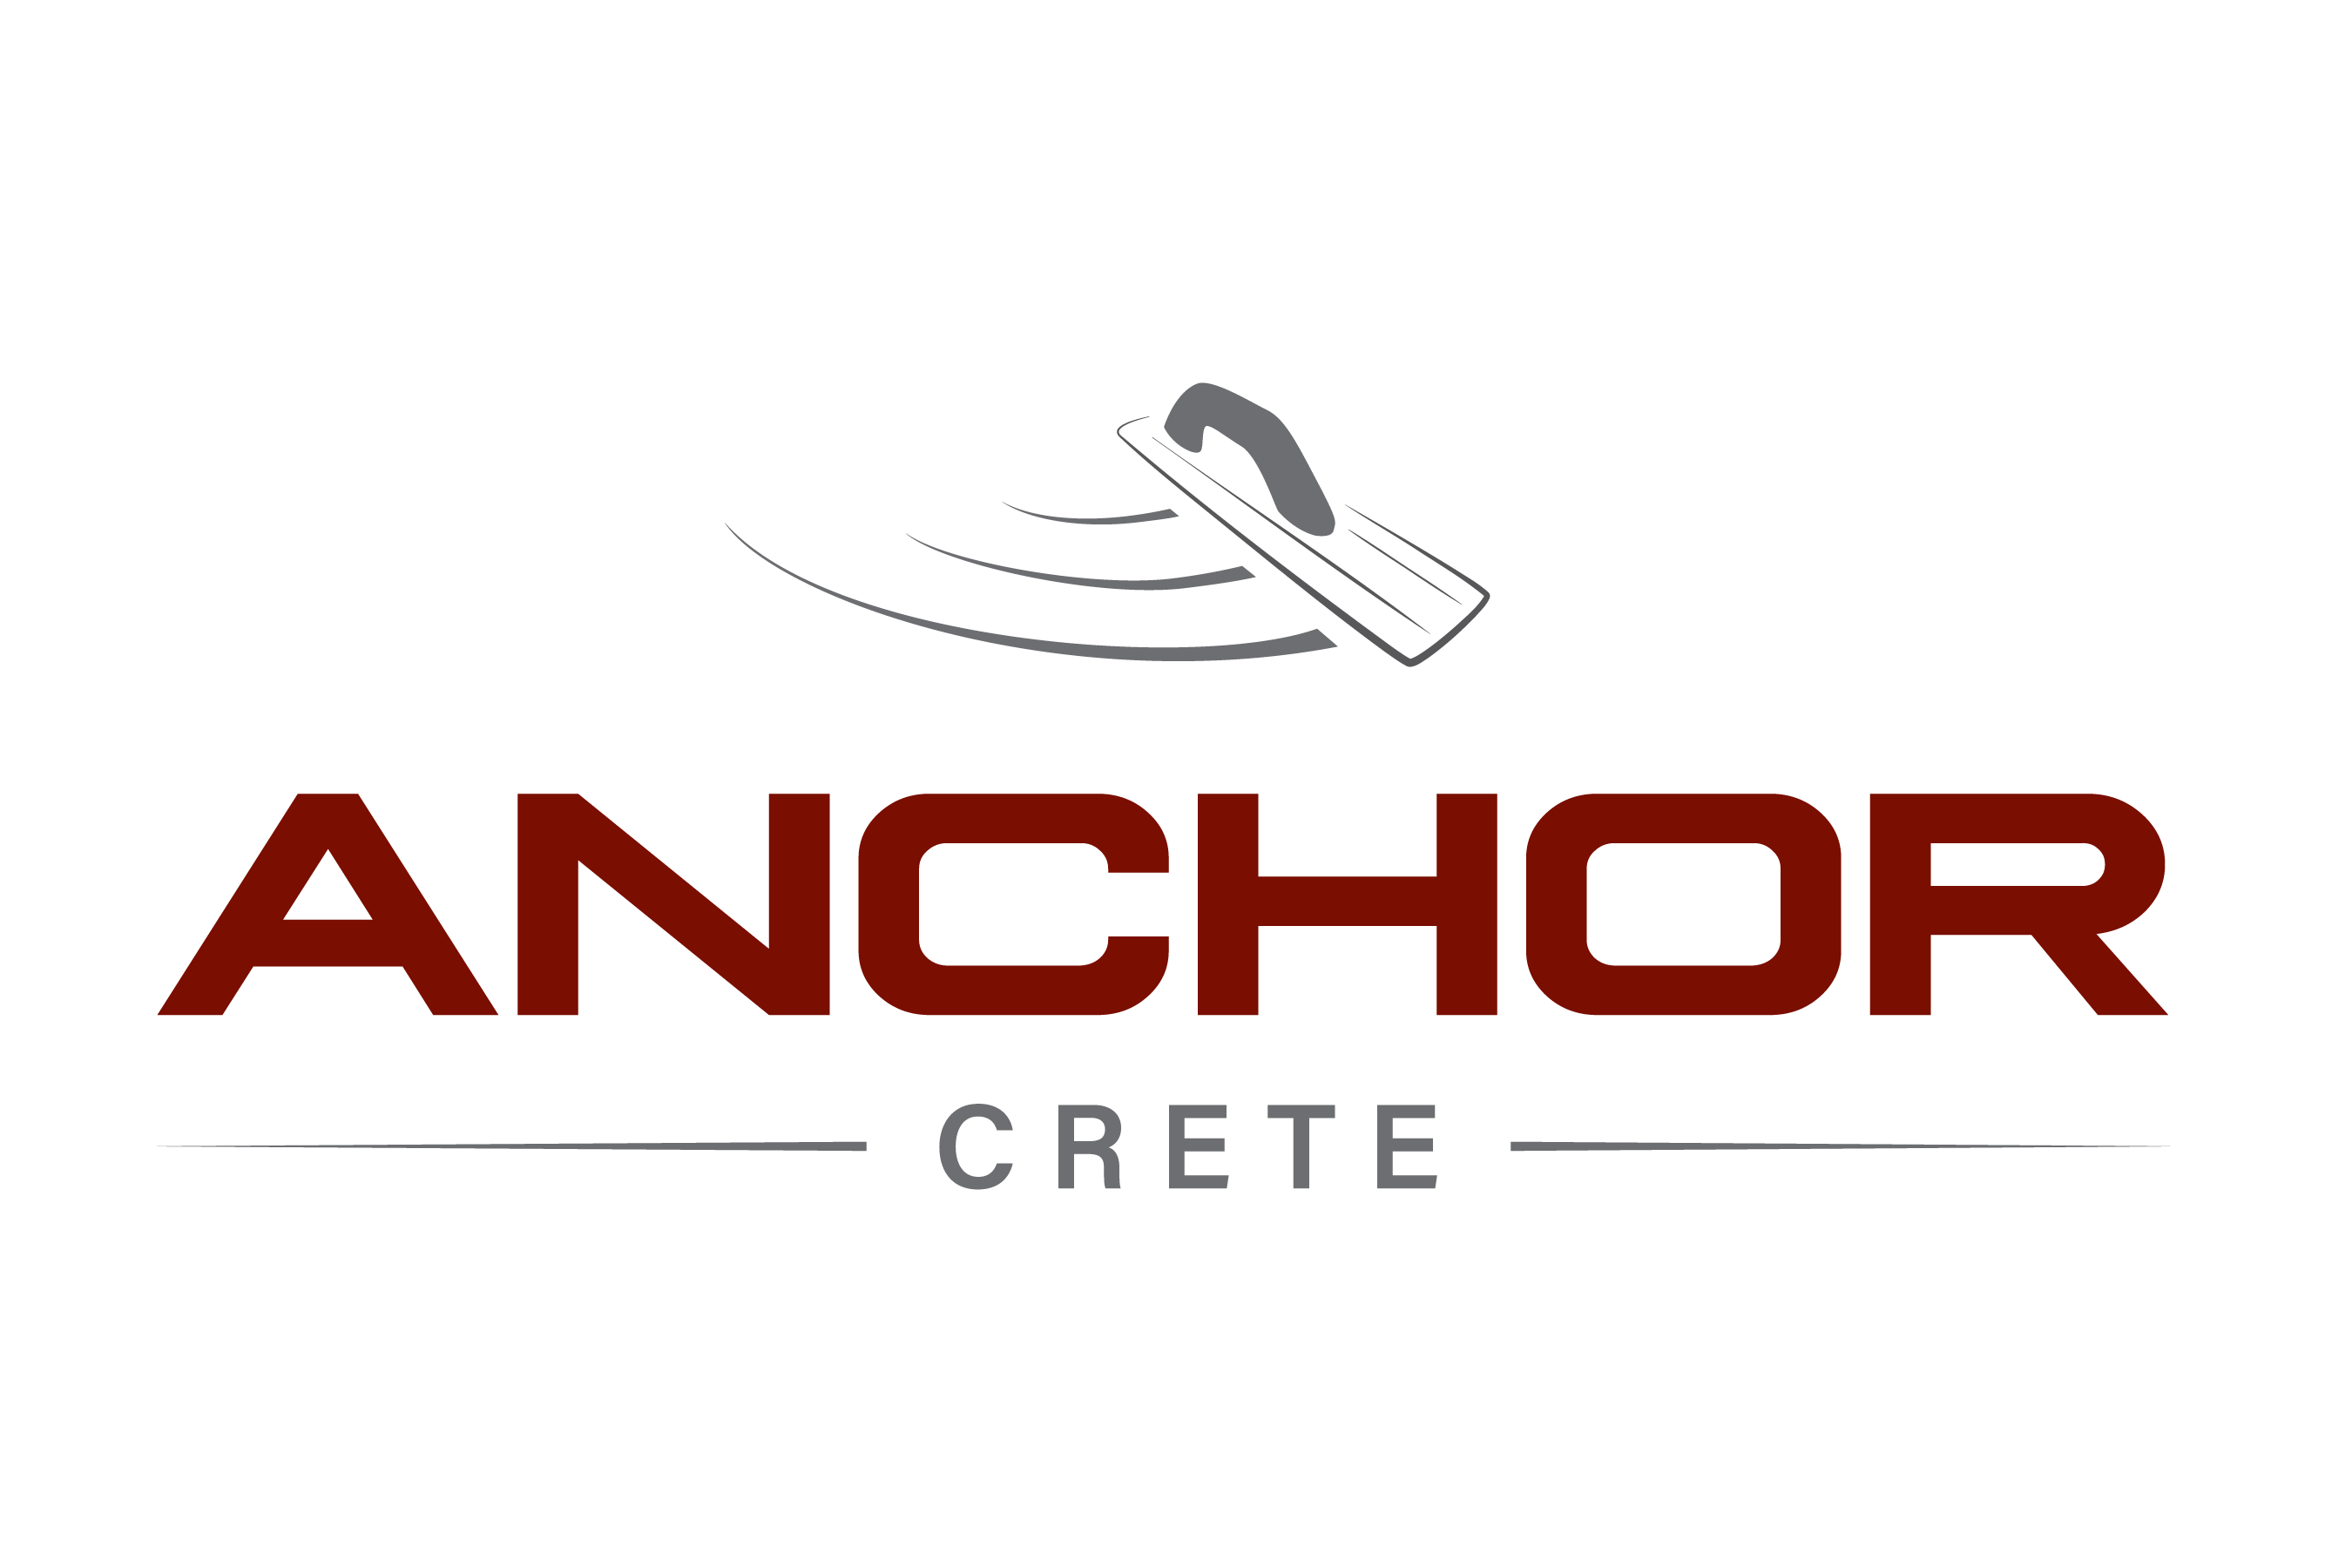 Anchor Crete Announces Revamped Website to Better Serve Ohio Residents